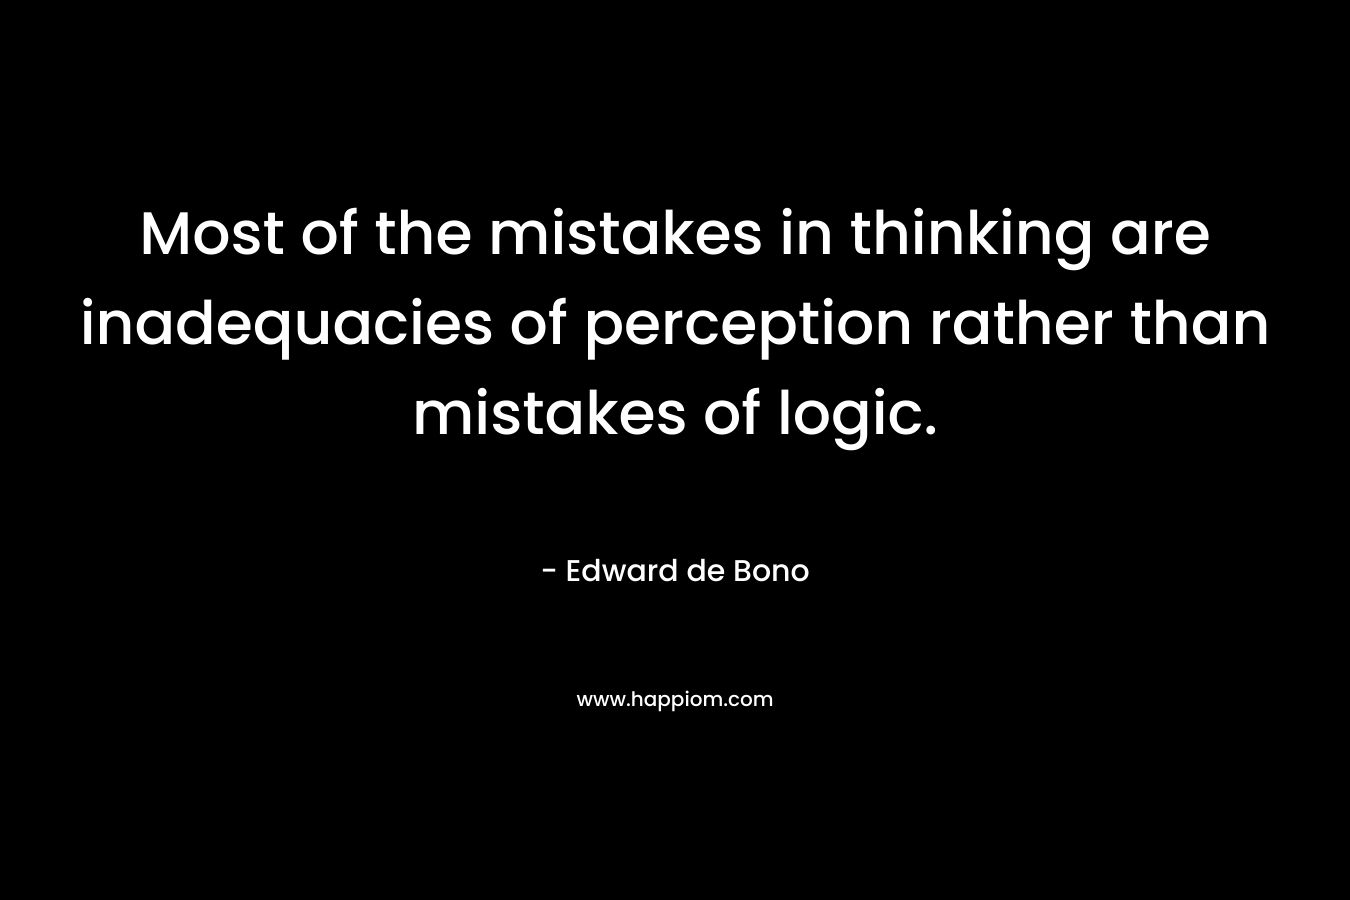 Most of the mistakes in thinking are inadequacies of perception rather than mistakes of logic. – Edward de Bono